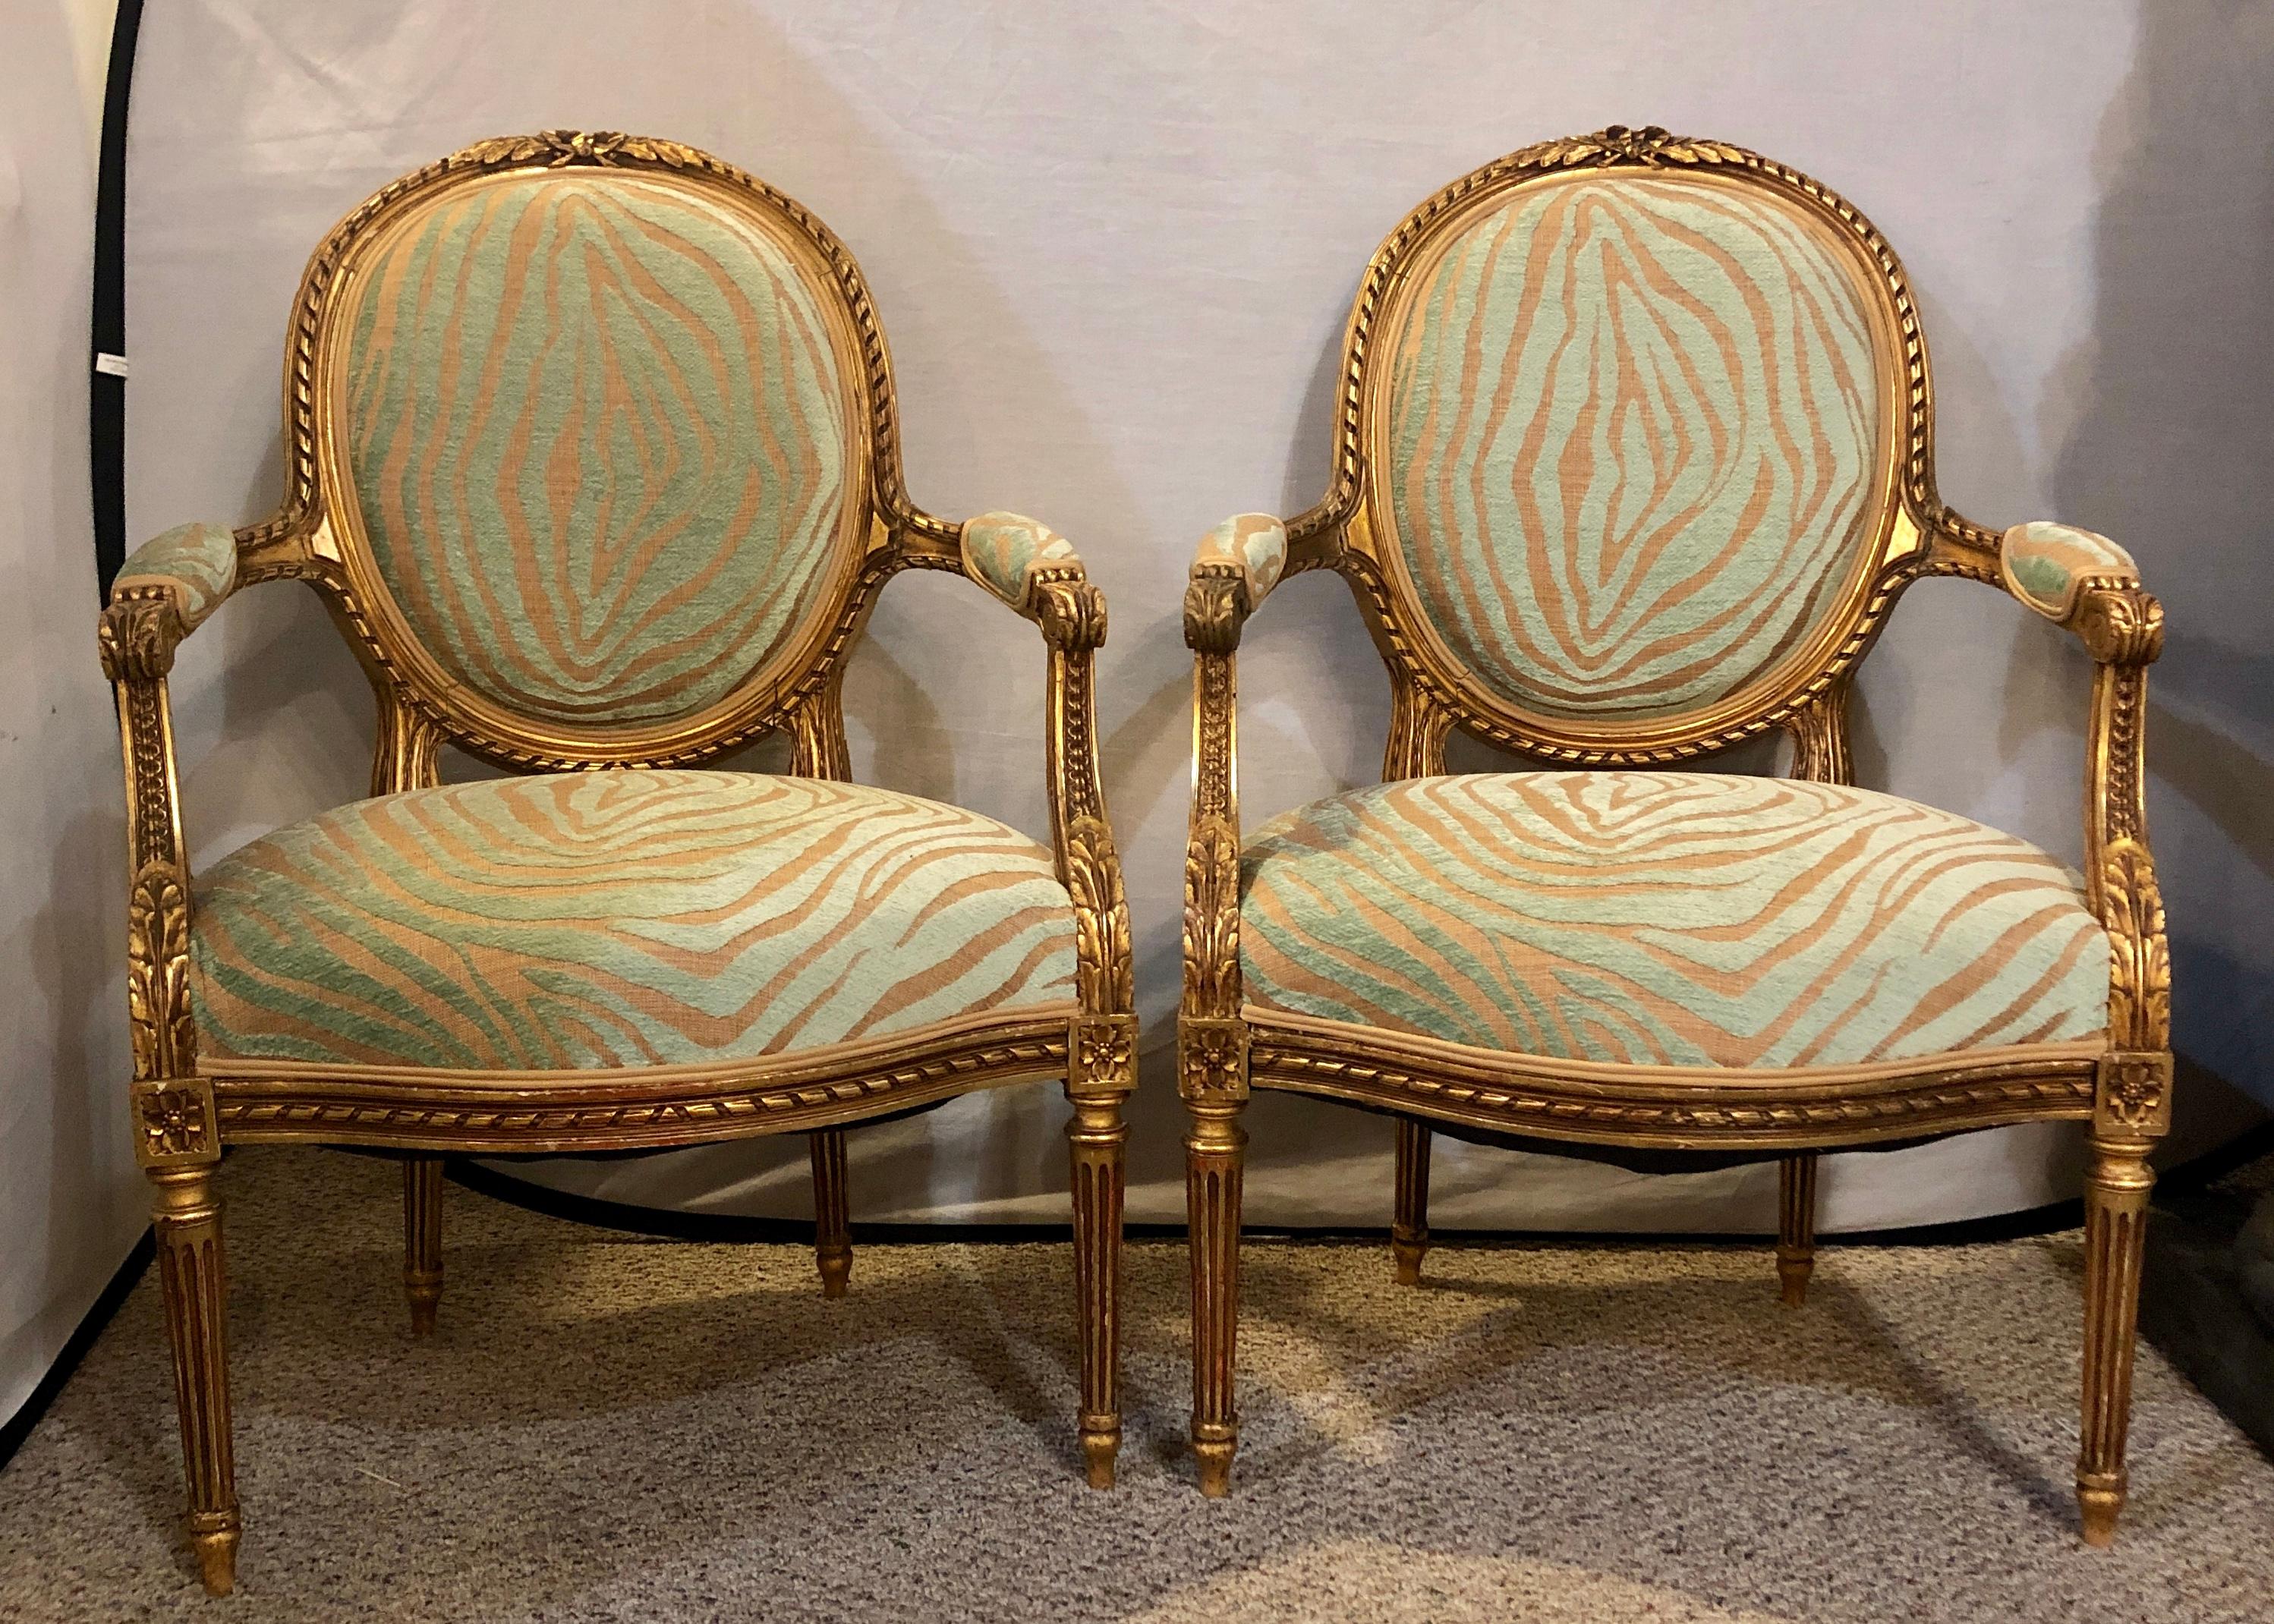 Hollywood Regency Pair of Louis XVI Style Green Zebra Striped Fauteuils or Armchairs